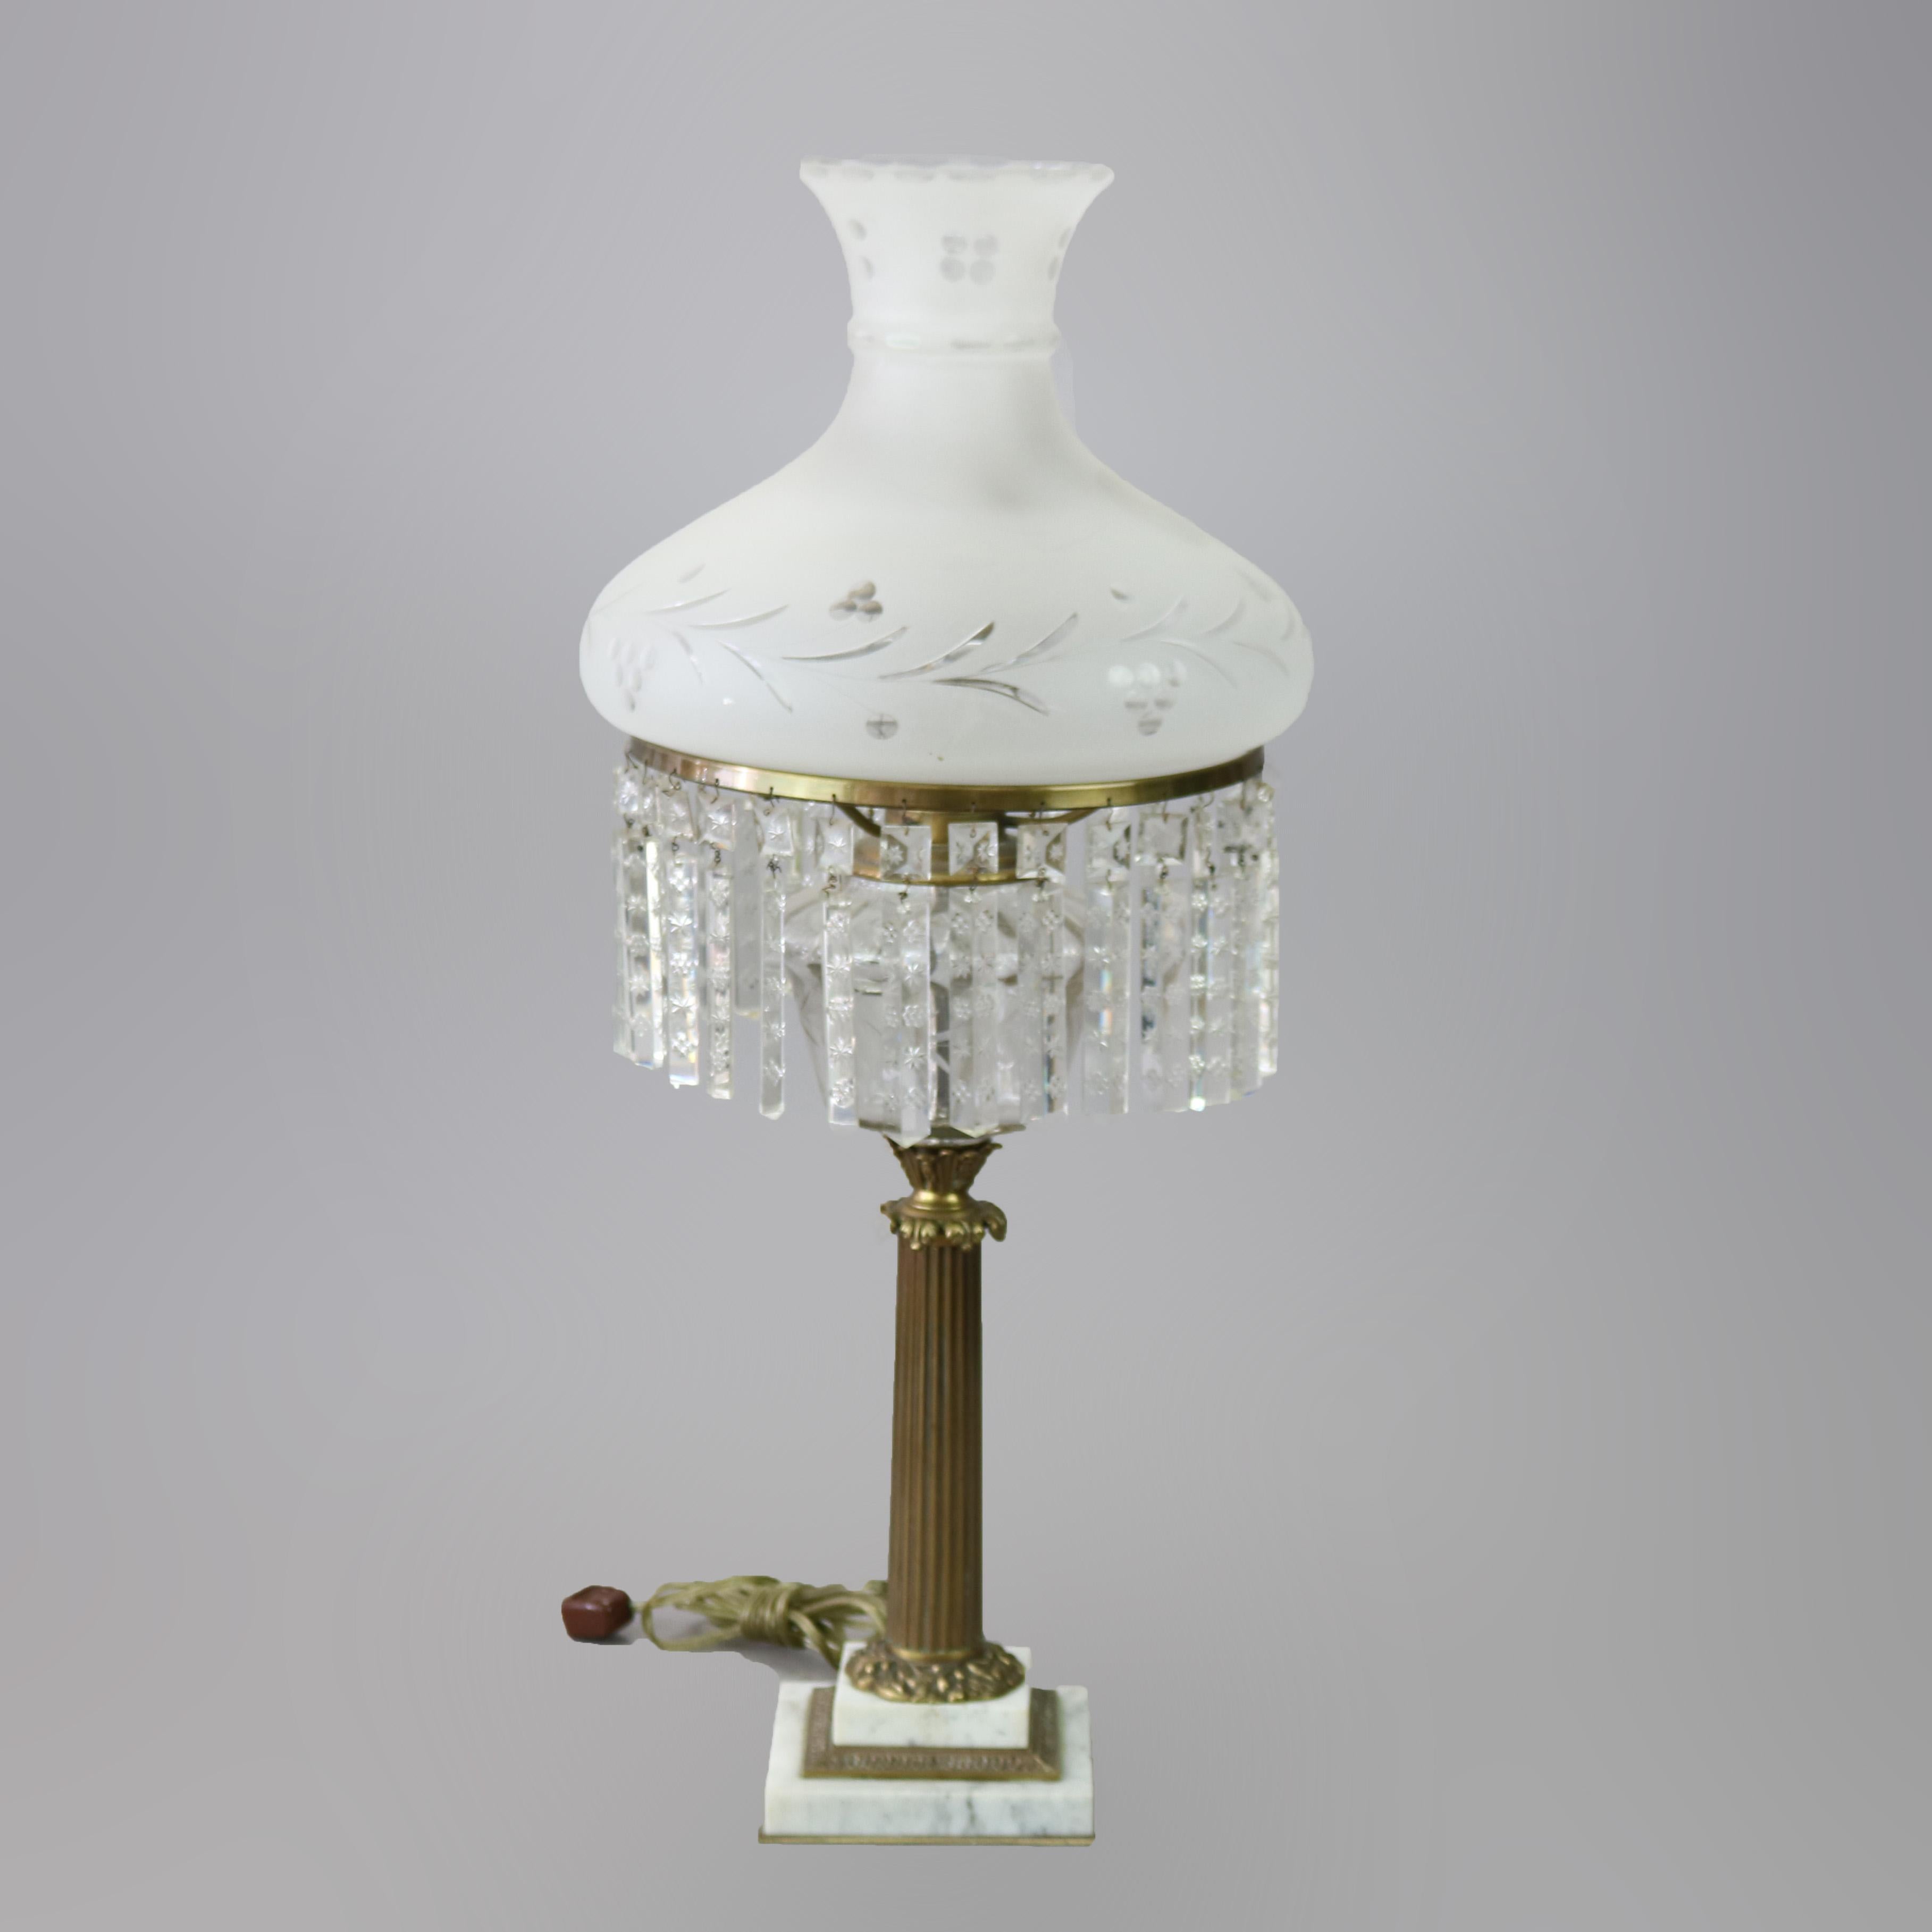 An neoclassical Sinumbra style electric table lamp offers etched glass shade over double socket base having reeded Corinthian column pedestal having marble plinth, 20th century

Measures - 30.5'' H x 34.25'' W x 25.5'' D.